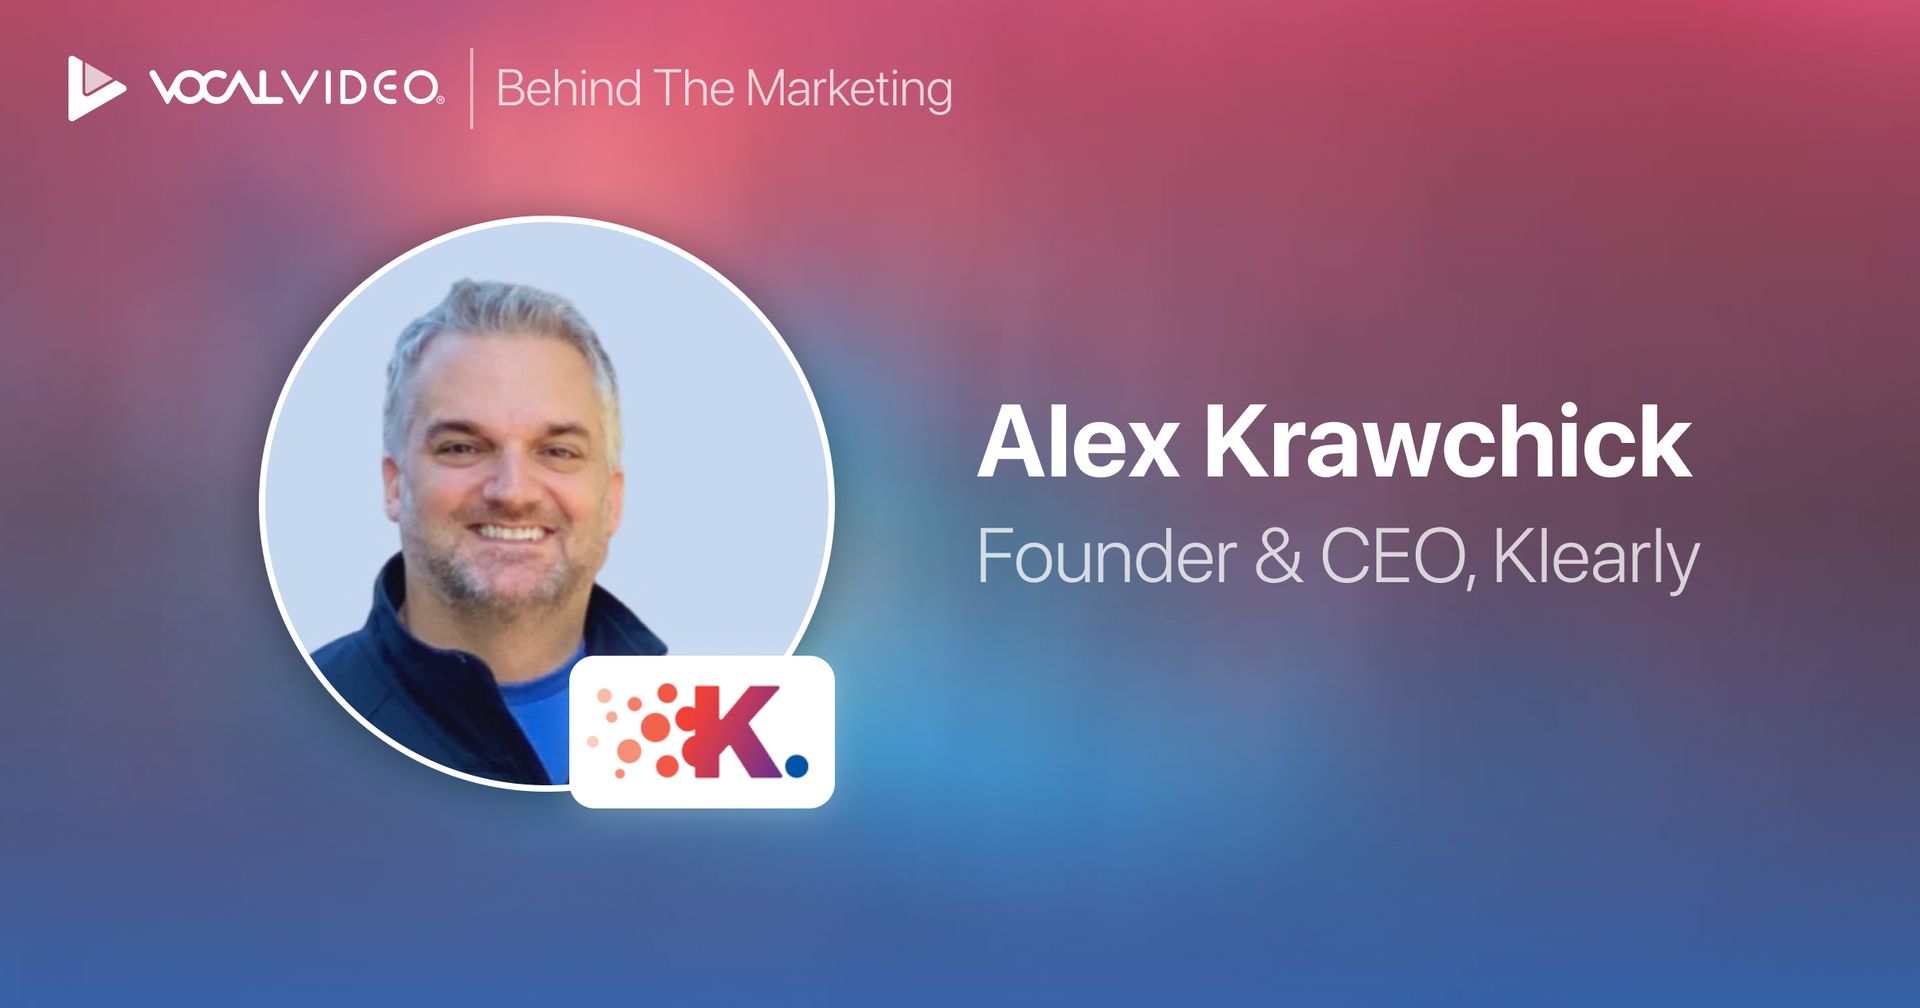 Behind the Marketing: Alex Krawchick, Founder & CEO of Klearly